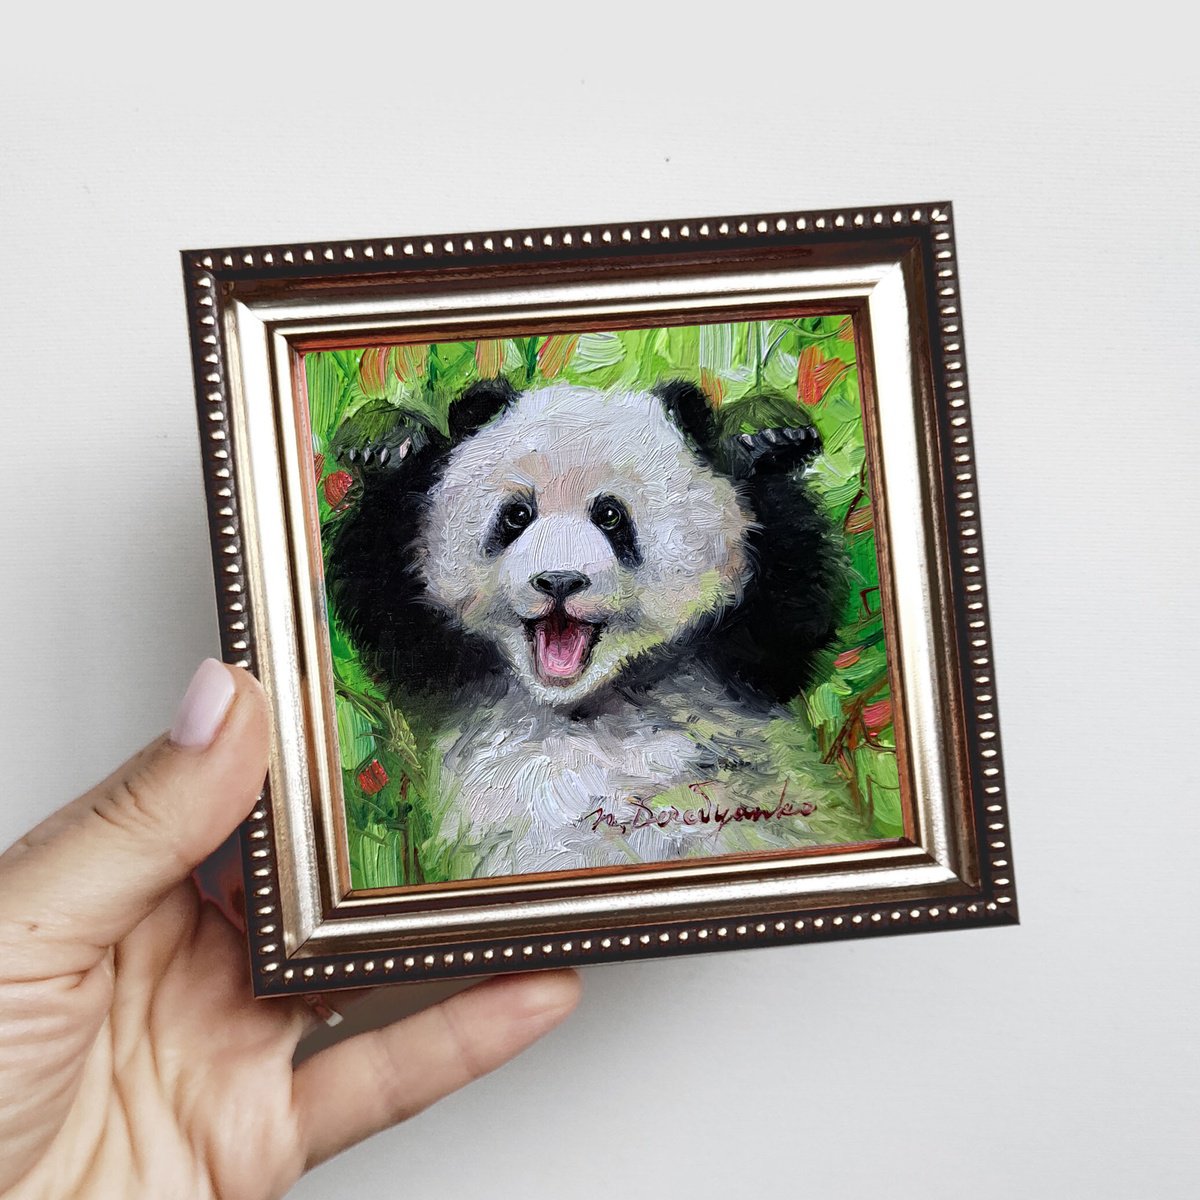 Panda painting oil original 4x4 in frame, Wild animal painting mini gift for friend by Nataly Derevyanko